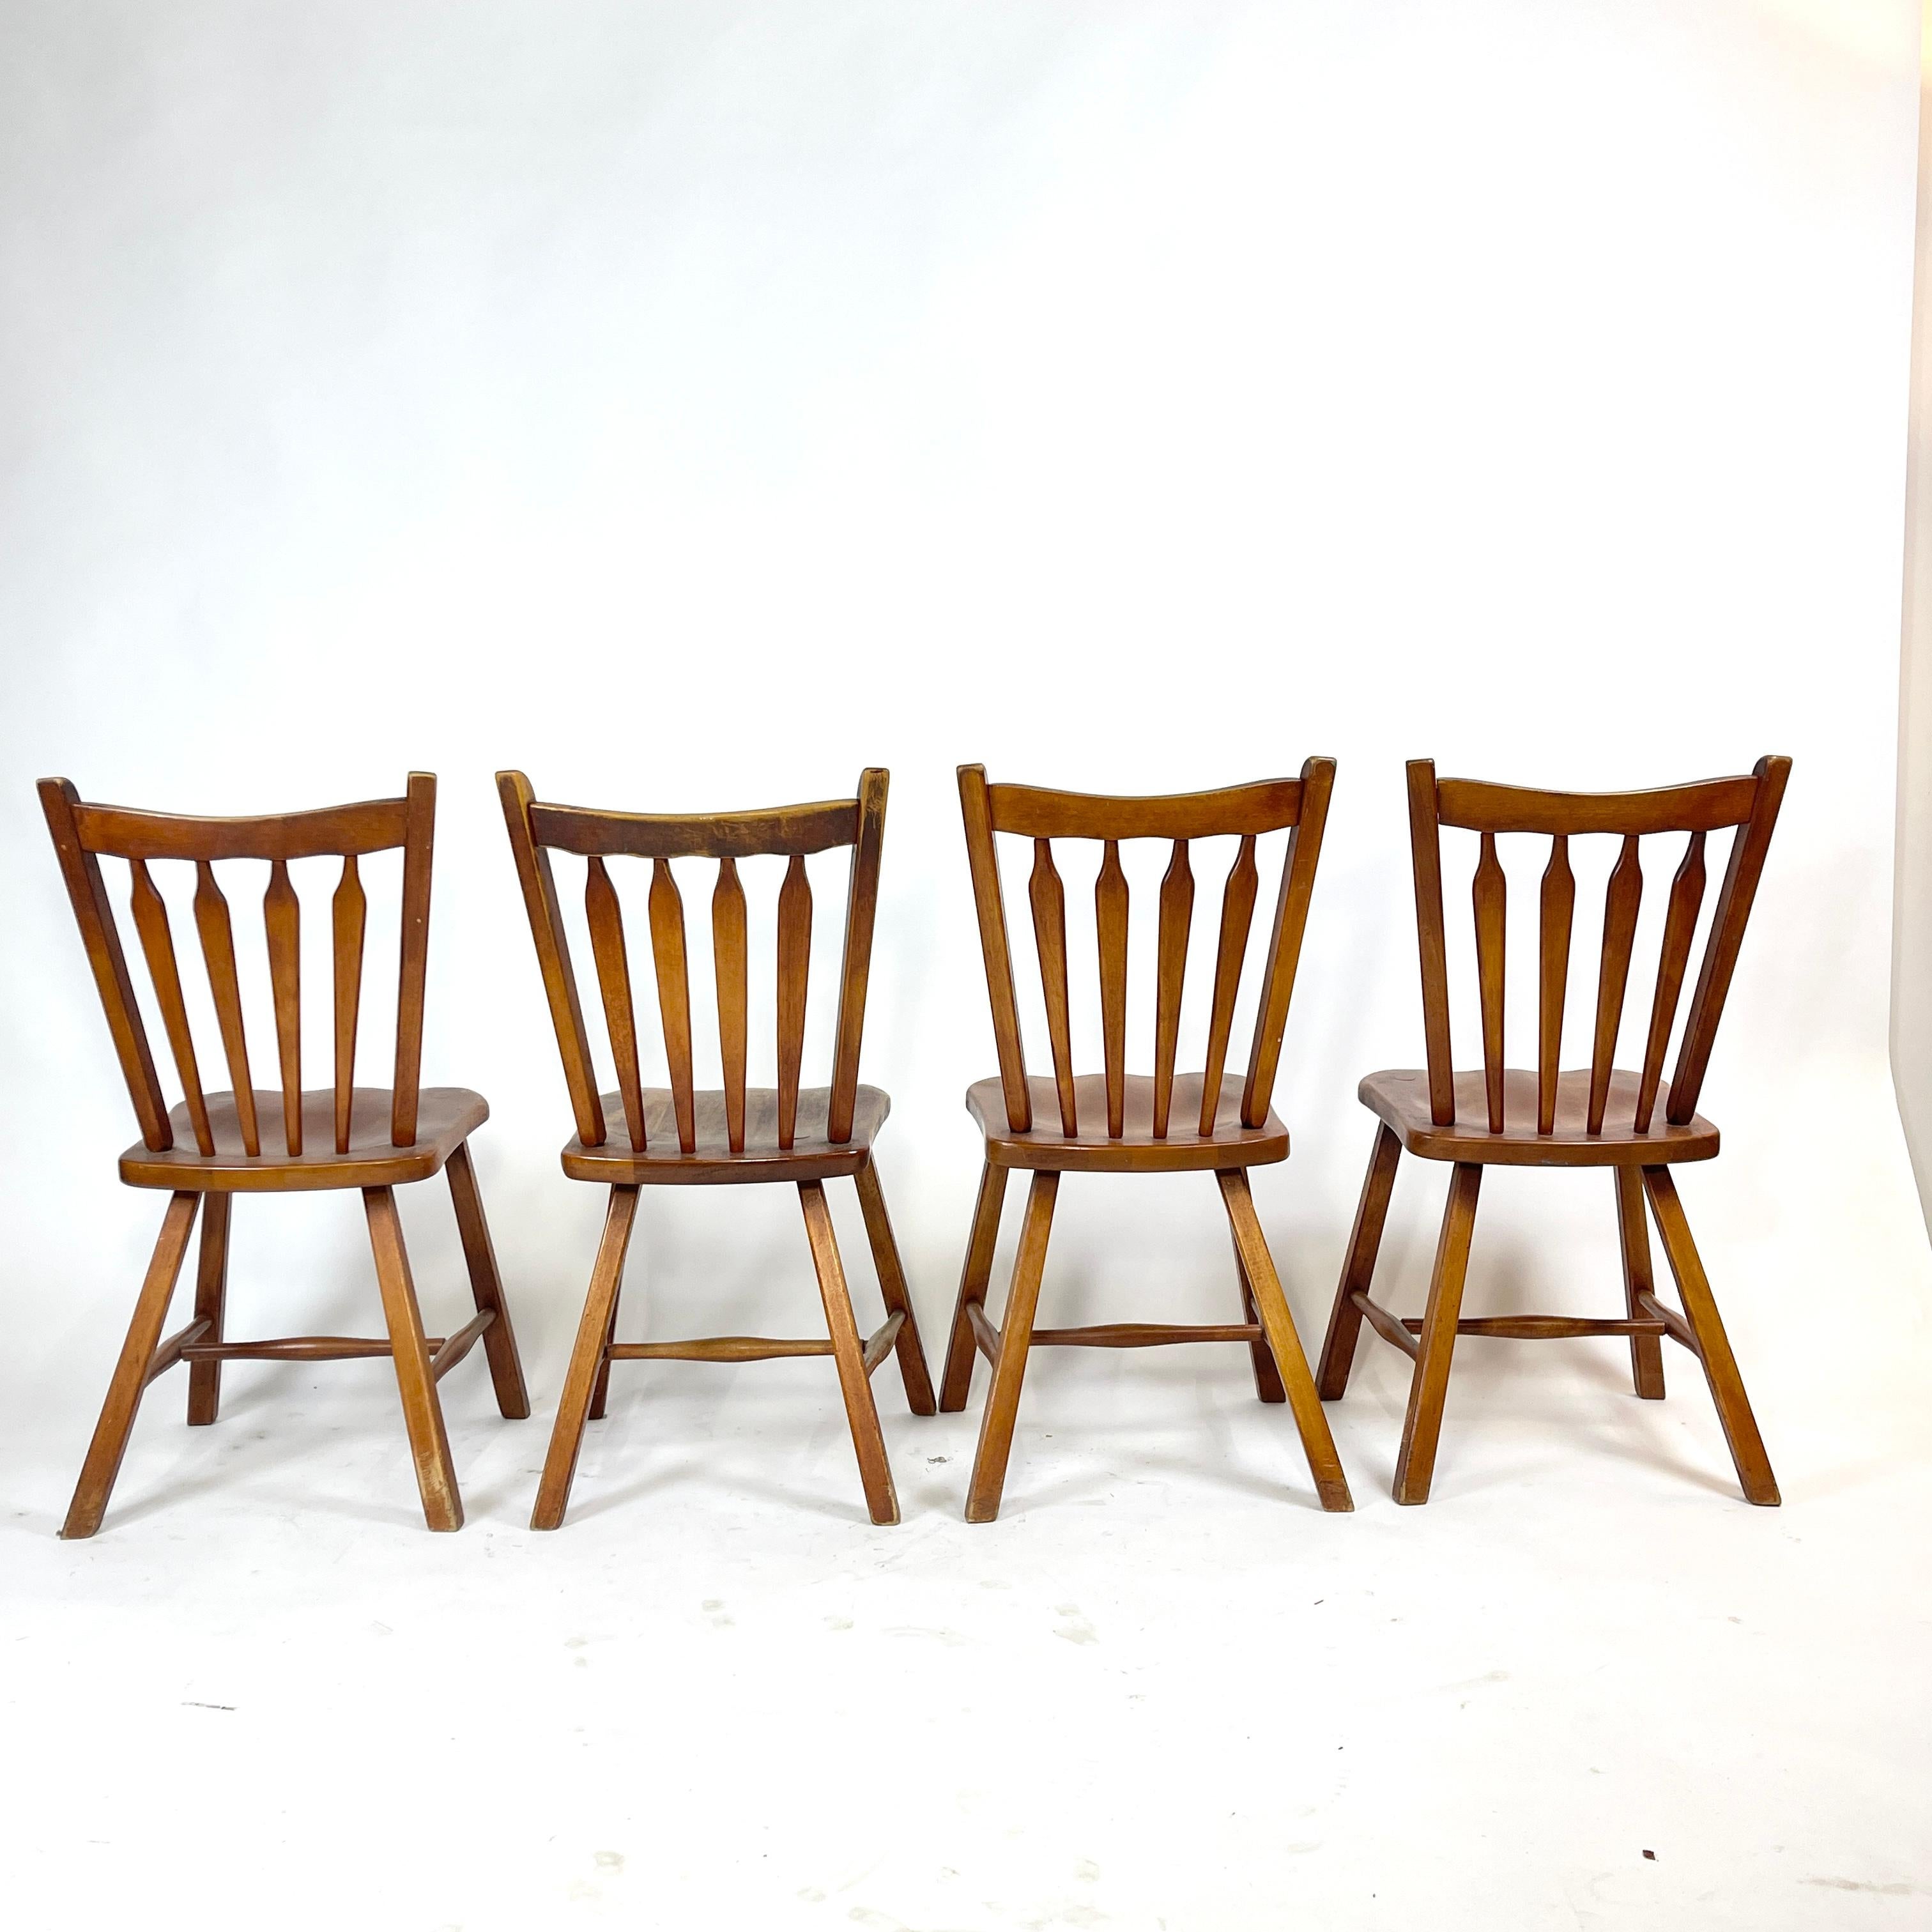 20th Century Four Hard Rock Vermont Maple Americana Dining Chairs, Herman DeVries for Cushman